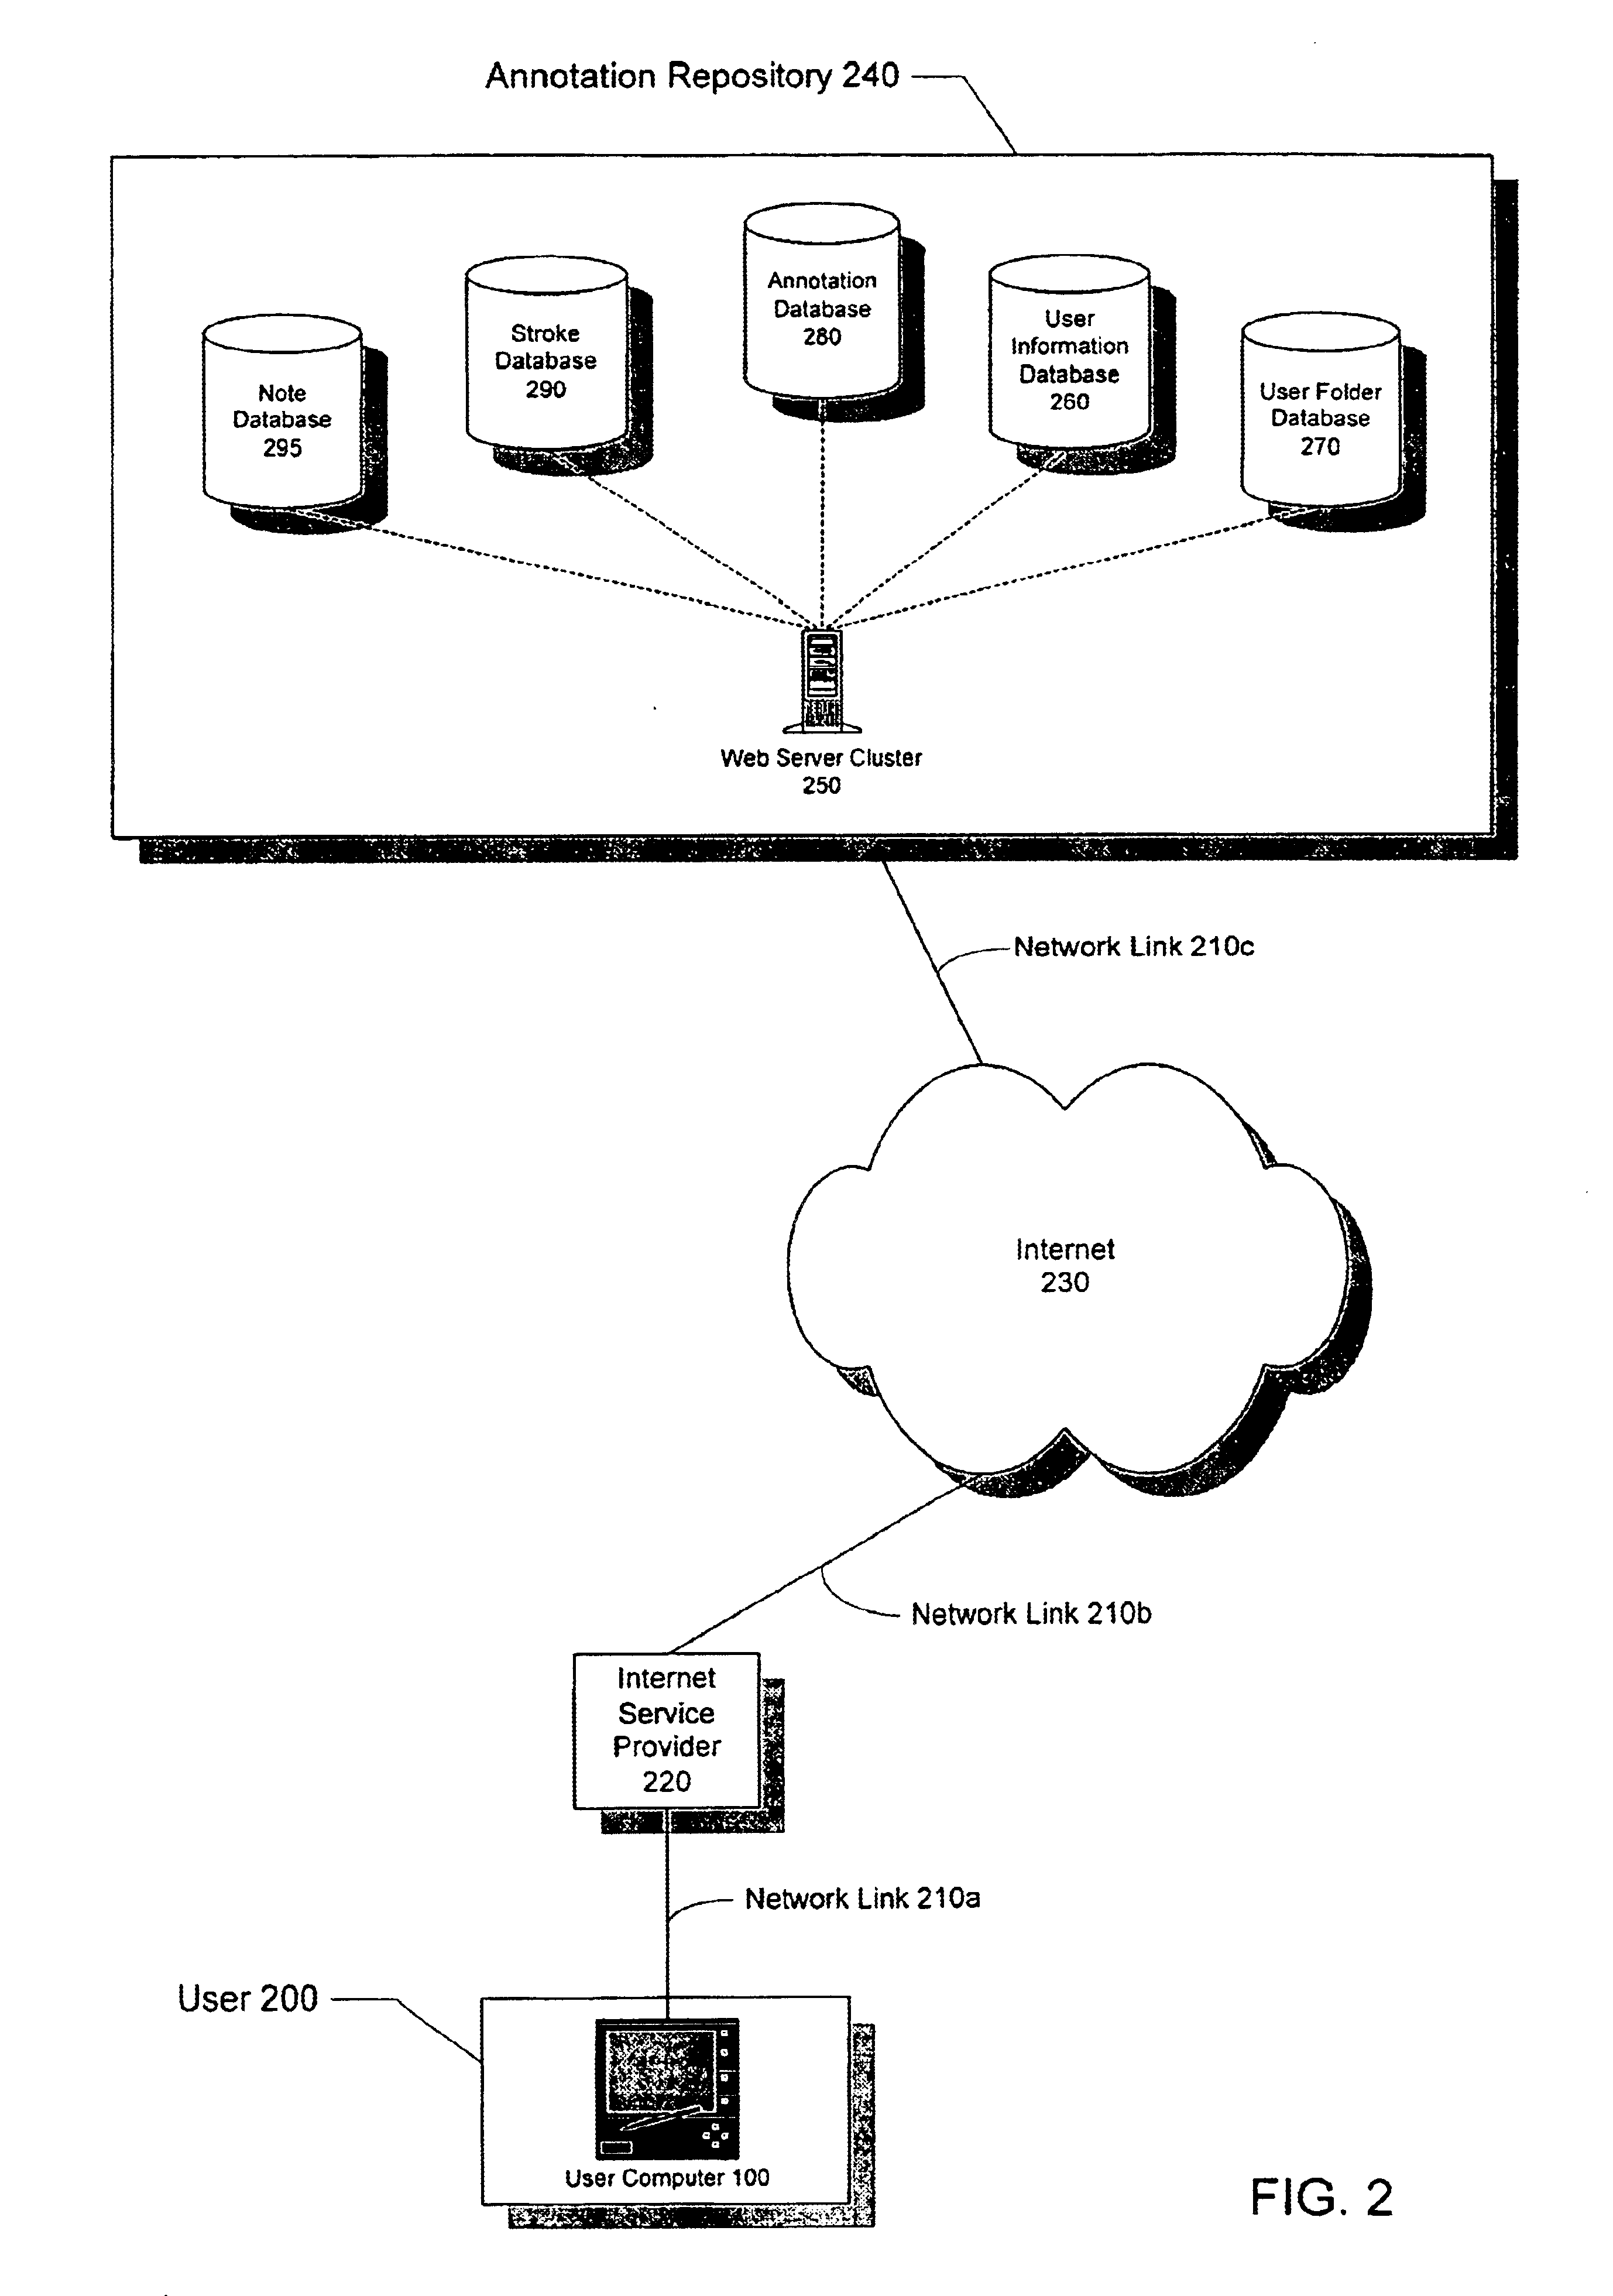 System and method for annotating web-based documents